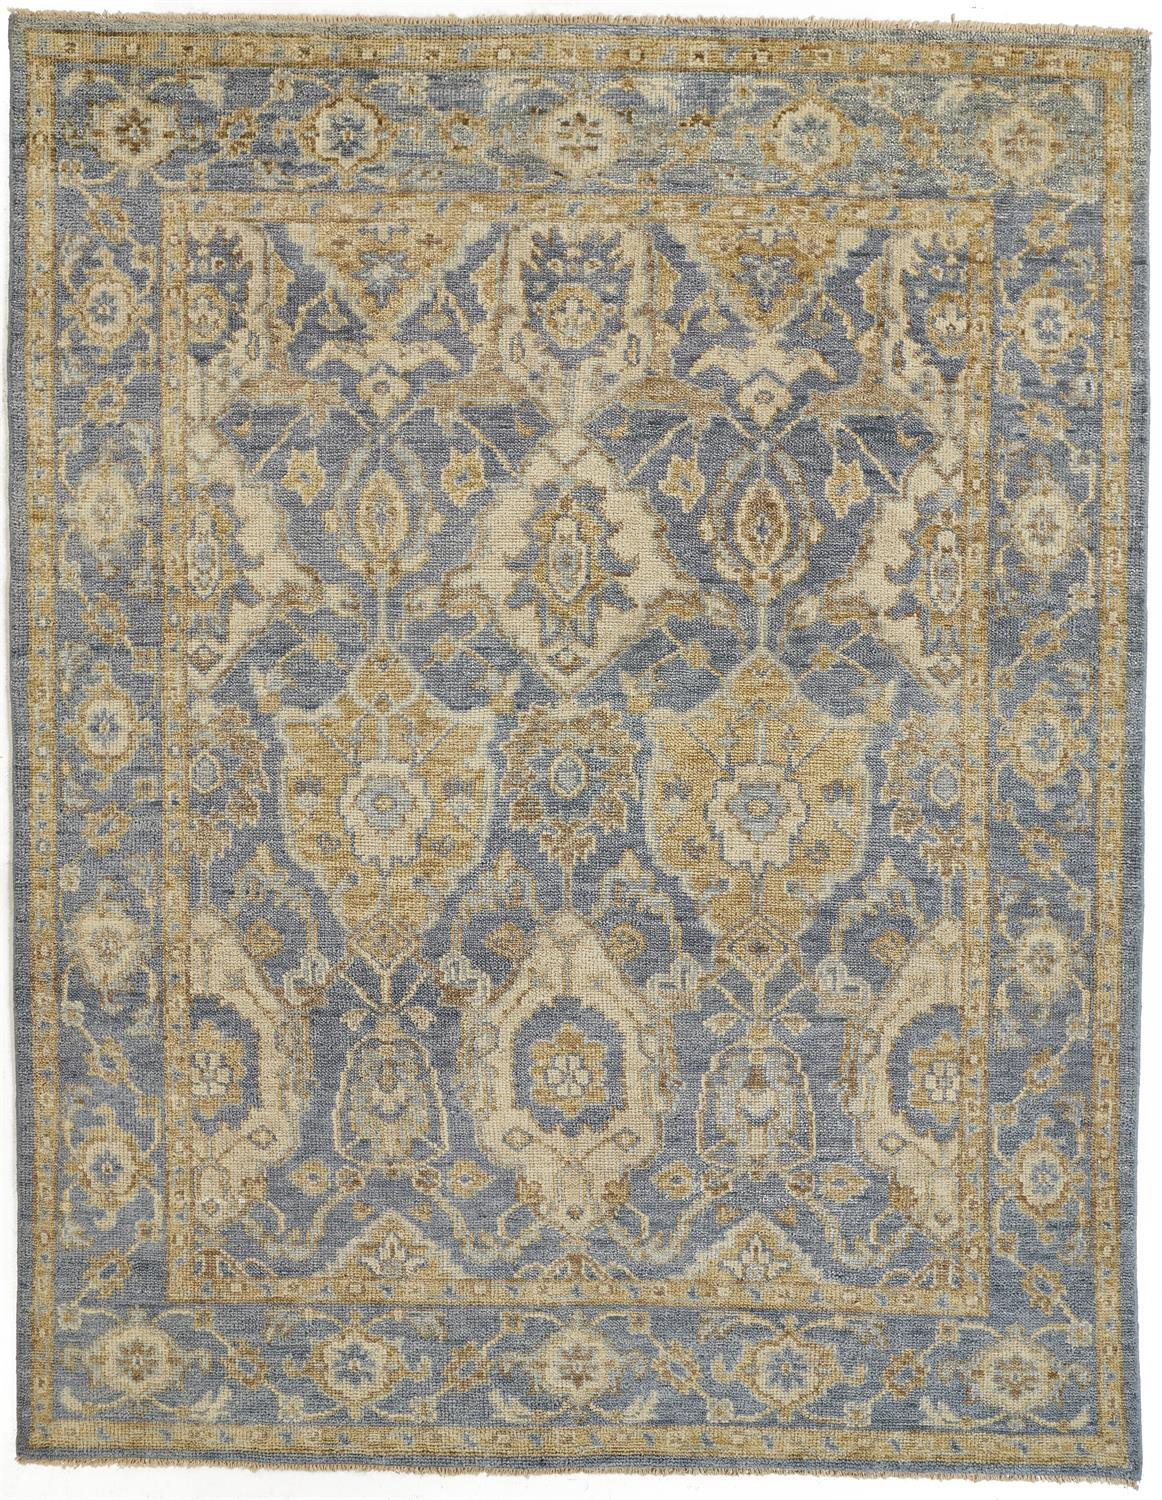 5' X 8' Blue Gold And Tan Wool Floral Hand Knotted Stain Resistant Area Rug With Fringe-512613-1